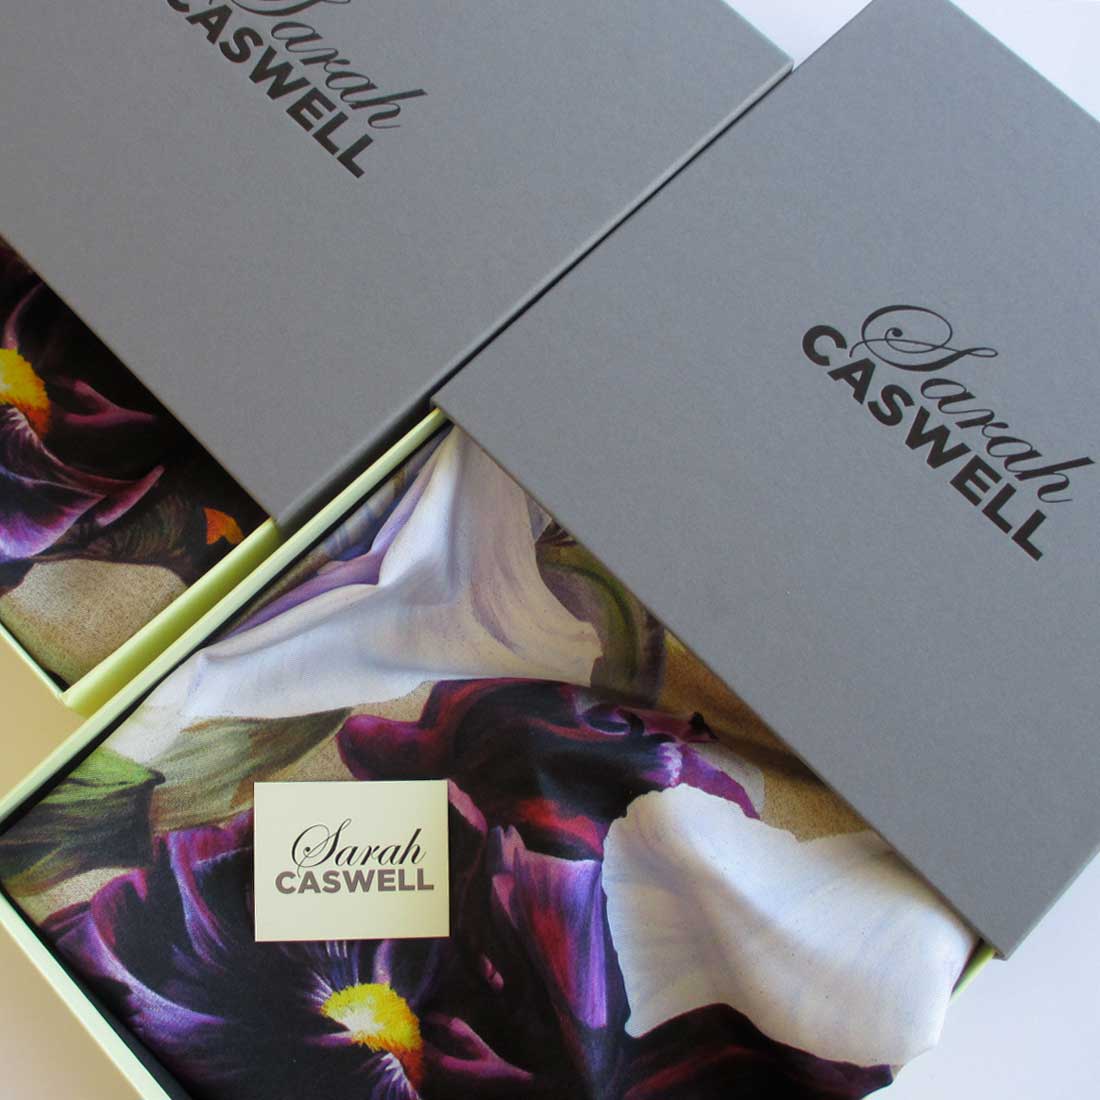 Sarah Caswell packaging